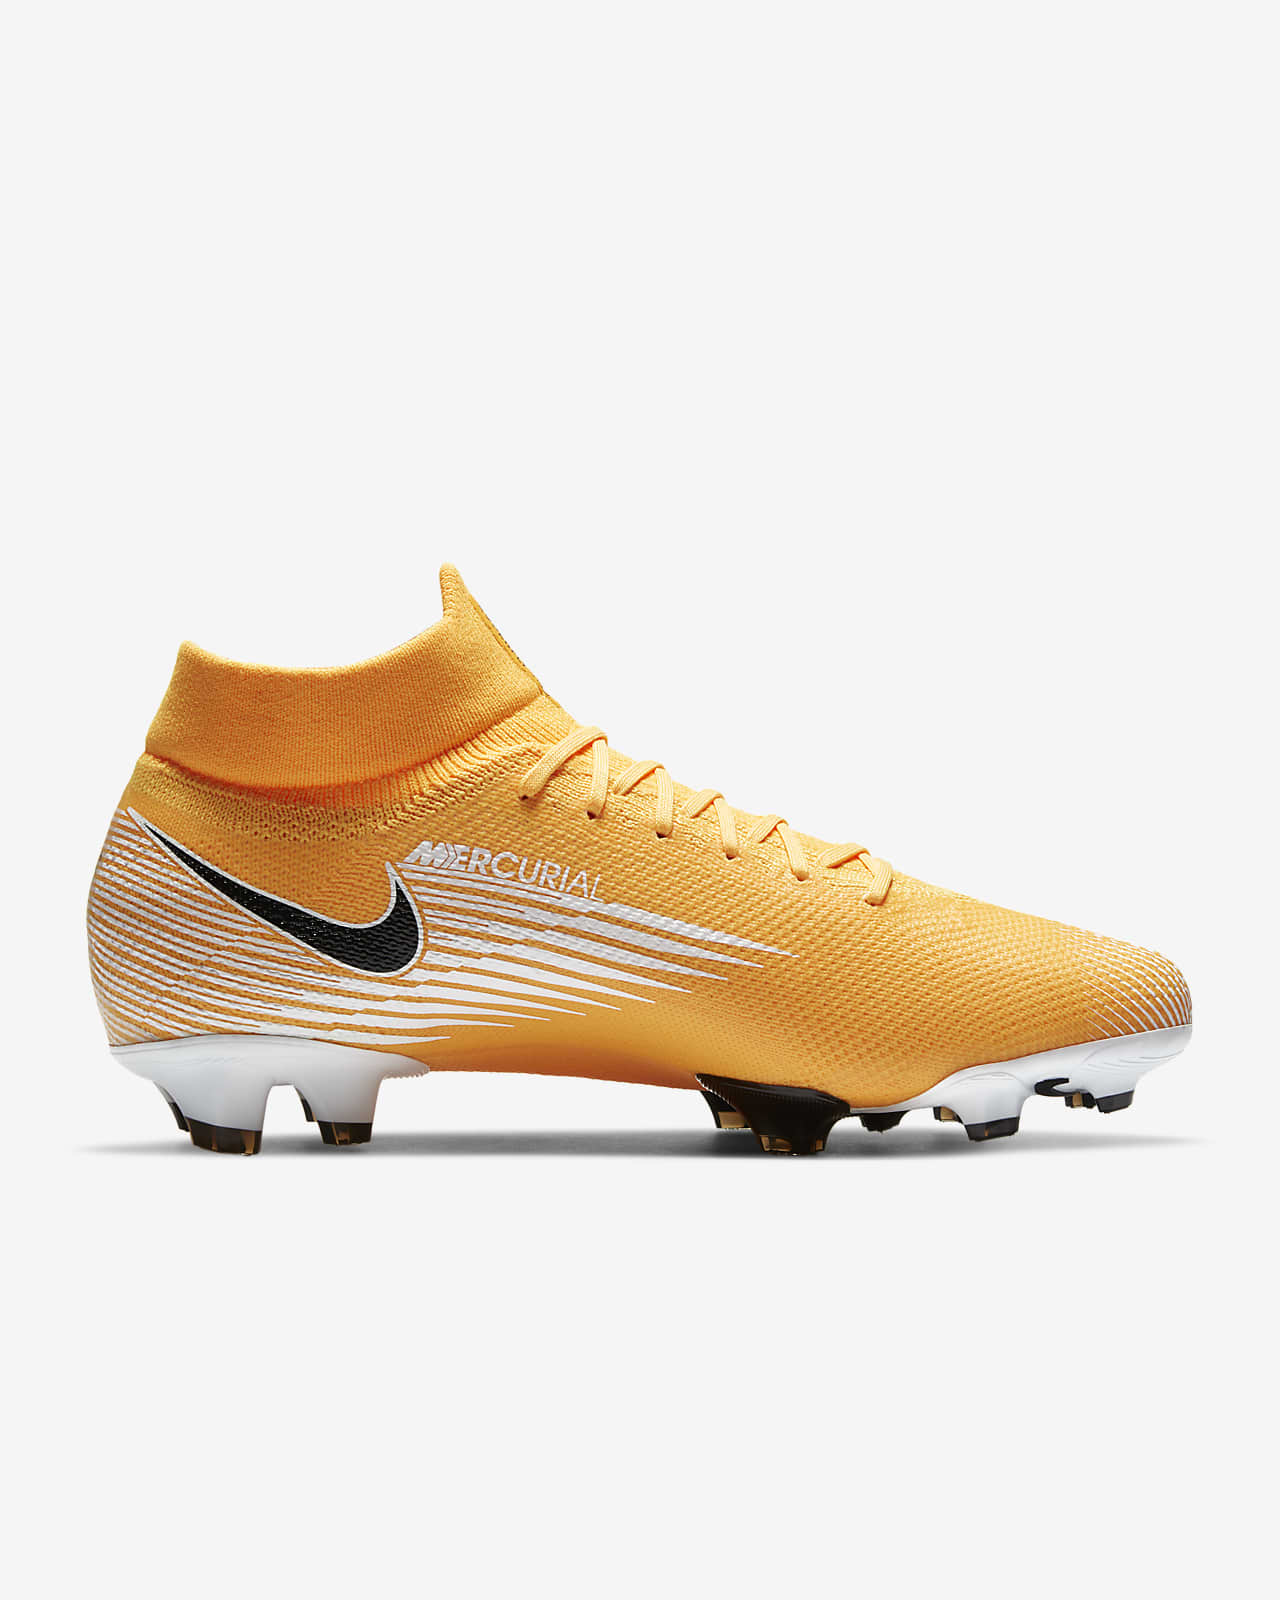 mercurial superfly pro